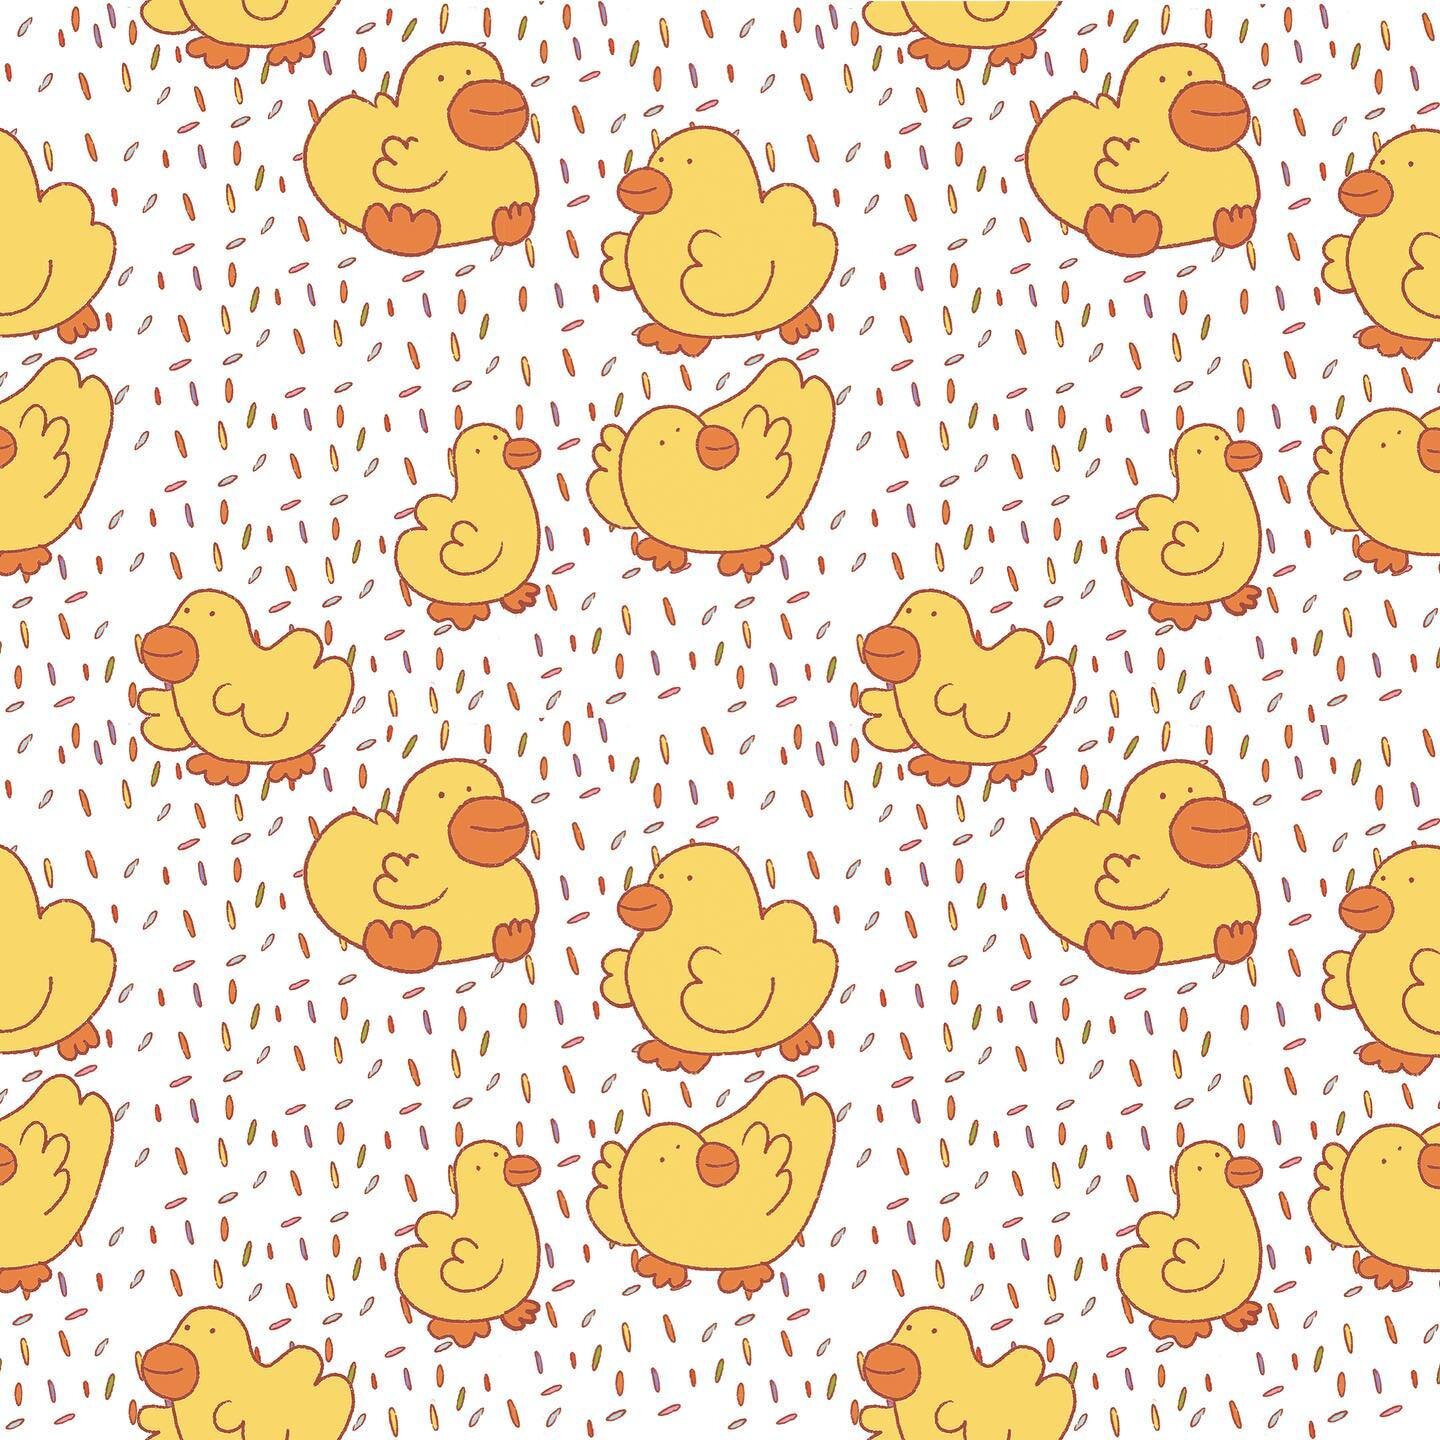 🍦 Ice Cream Ducks 🍦

Been having a lot of fun with creating some patterns with these characters. This is for all the duck lovers out there 🦆⭐️

#art #artist #patterndesign #patterns #surfacedesign #surfacepattern #surfacepatterndesigner #surfacepa